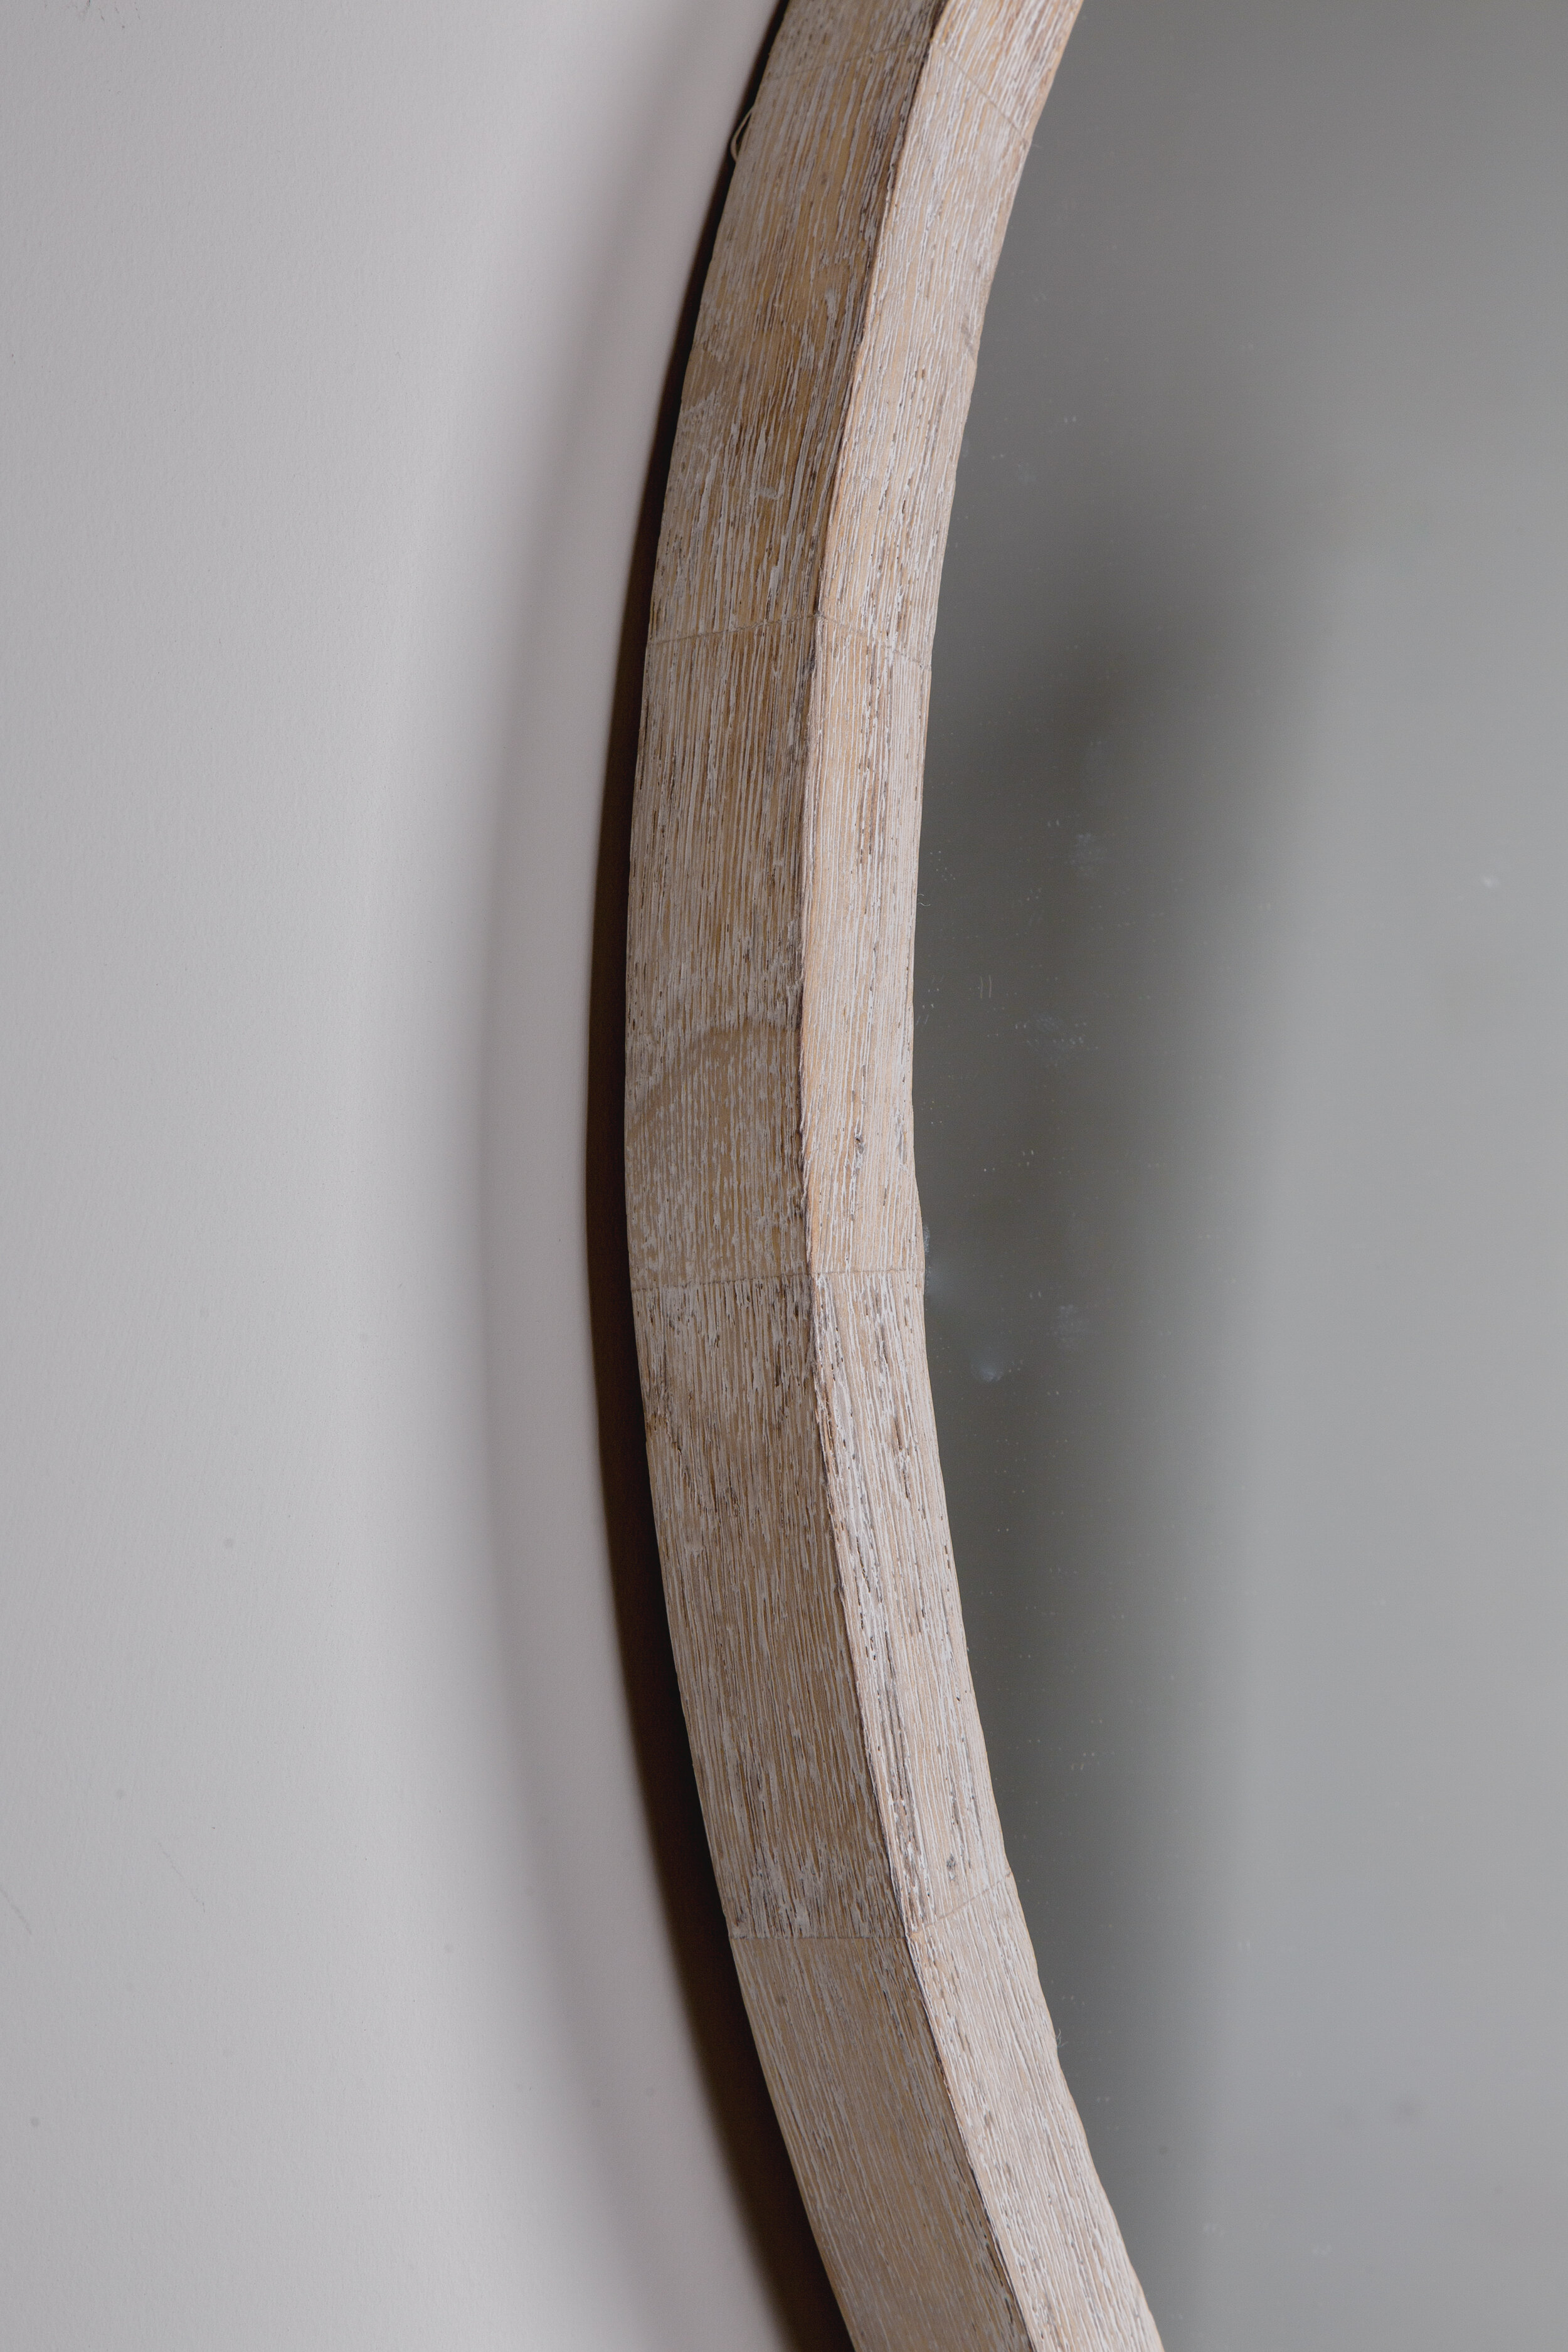 unfinished wooden frame of circular mirror against white wall